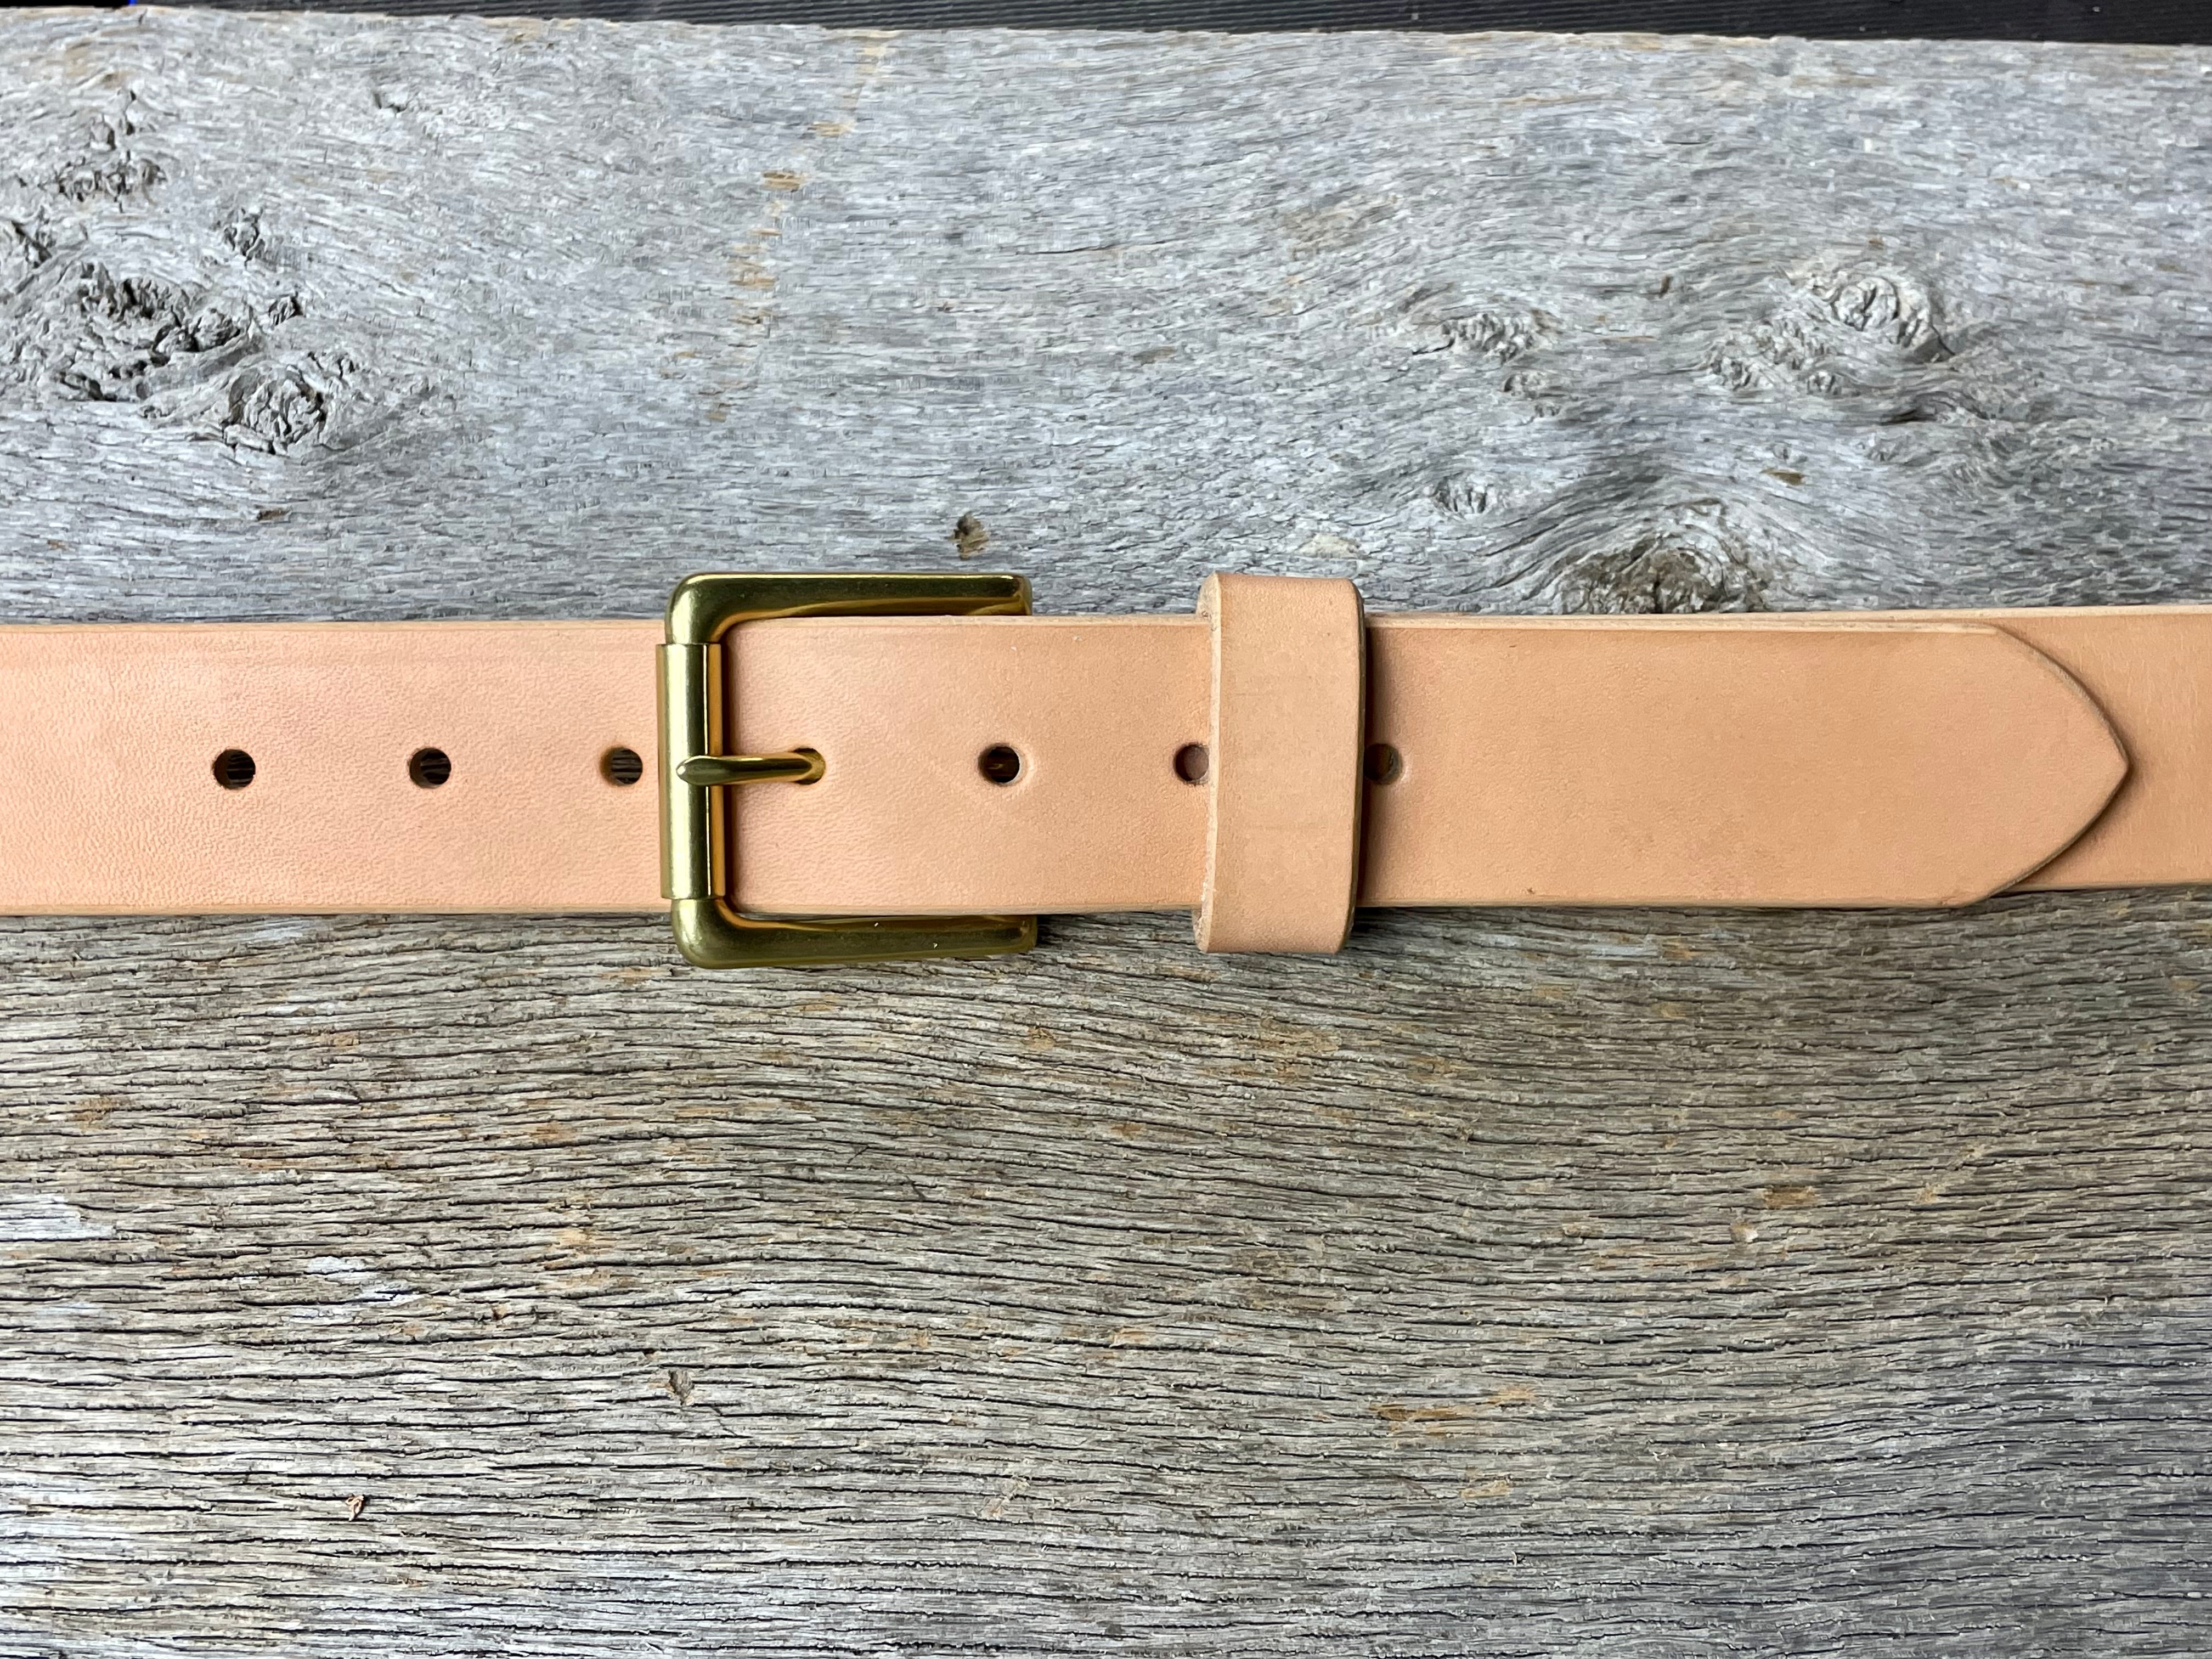 Heavy Duty Leather Belt - Natural English Bridle